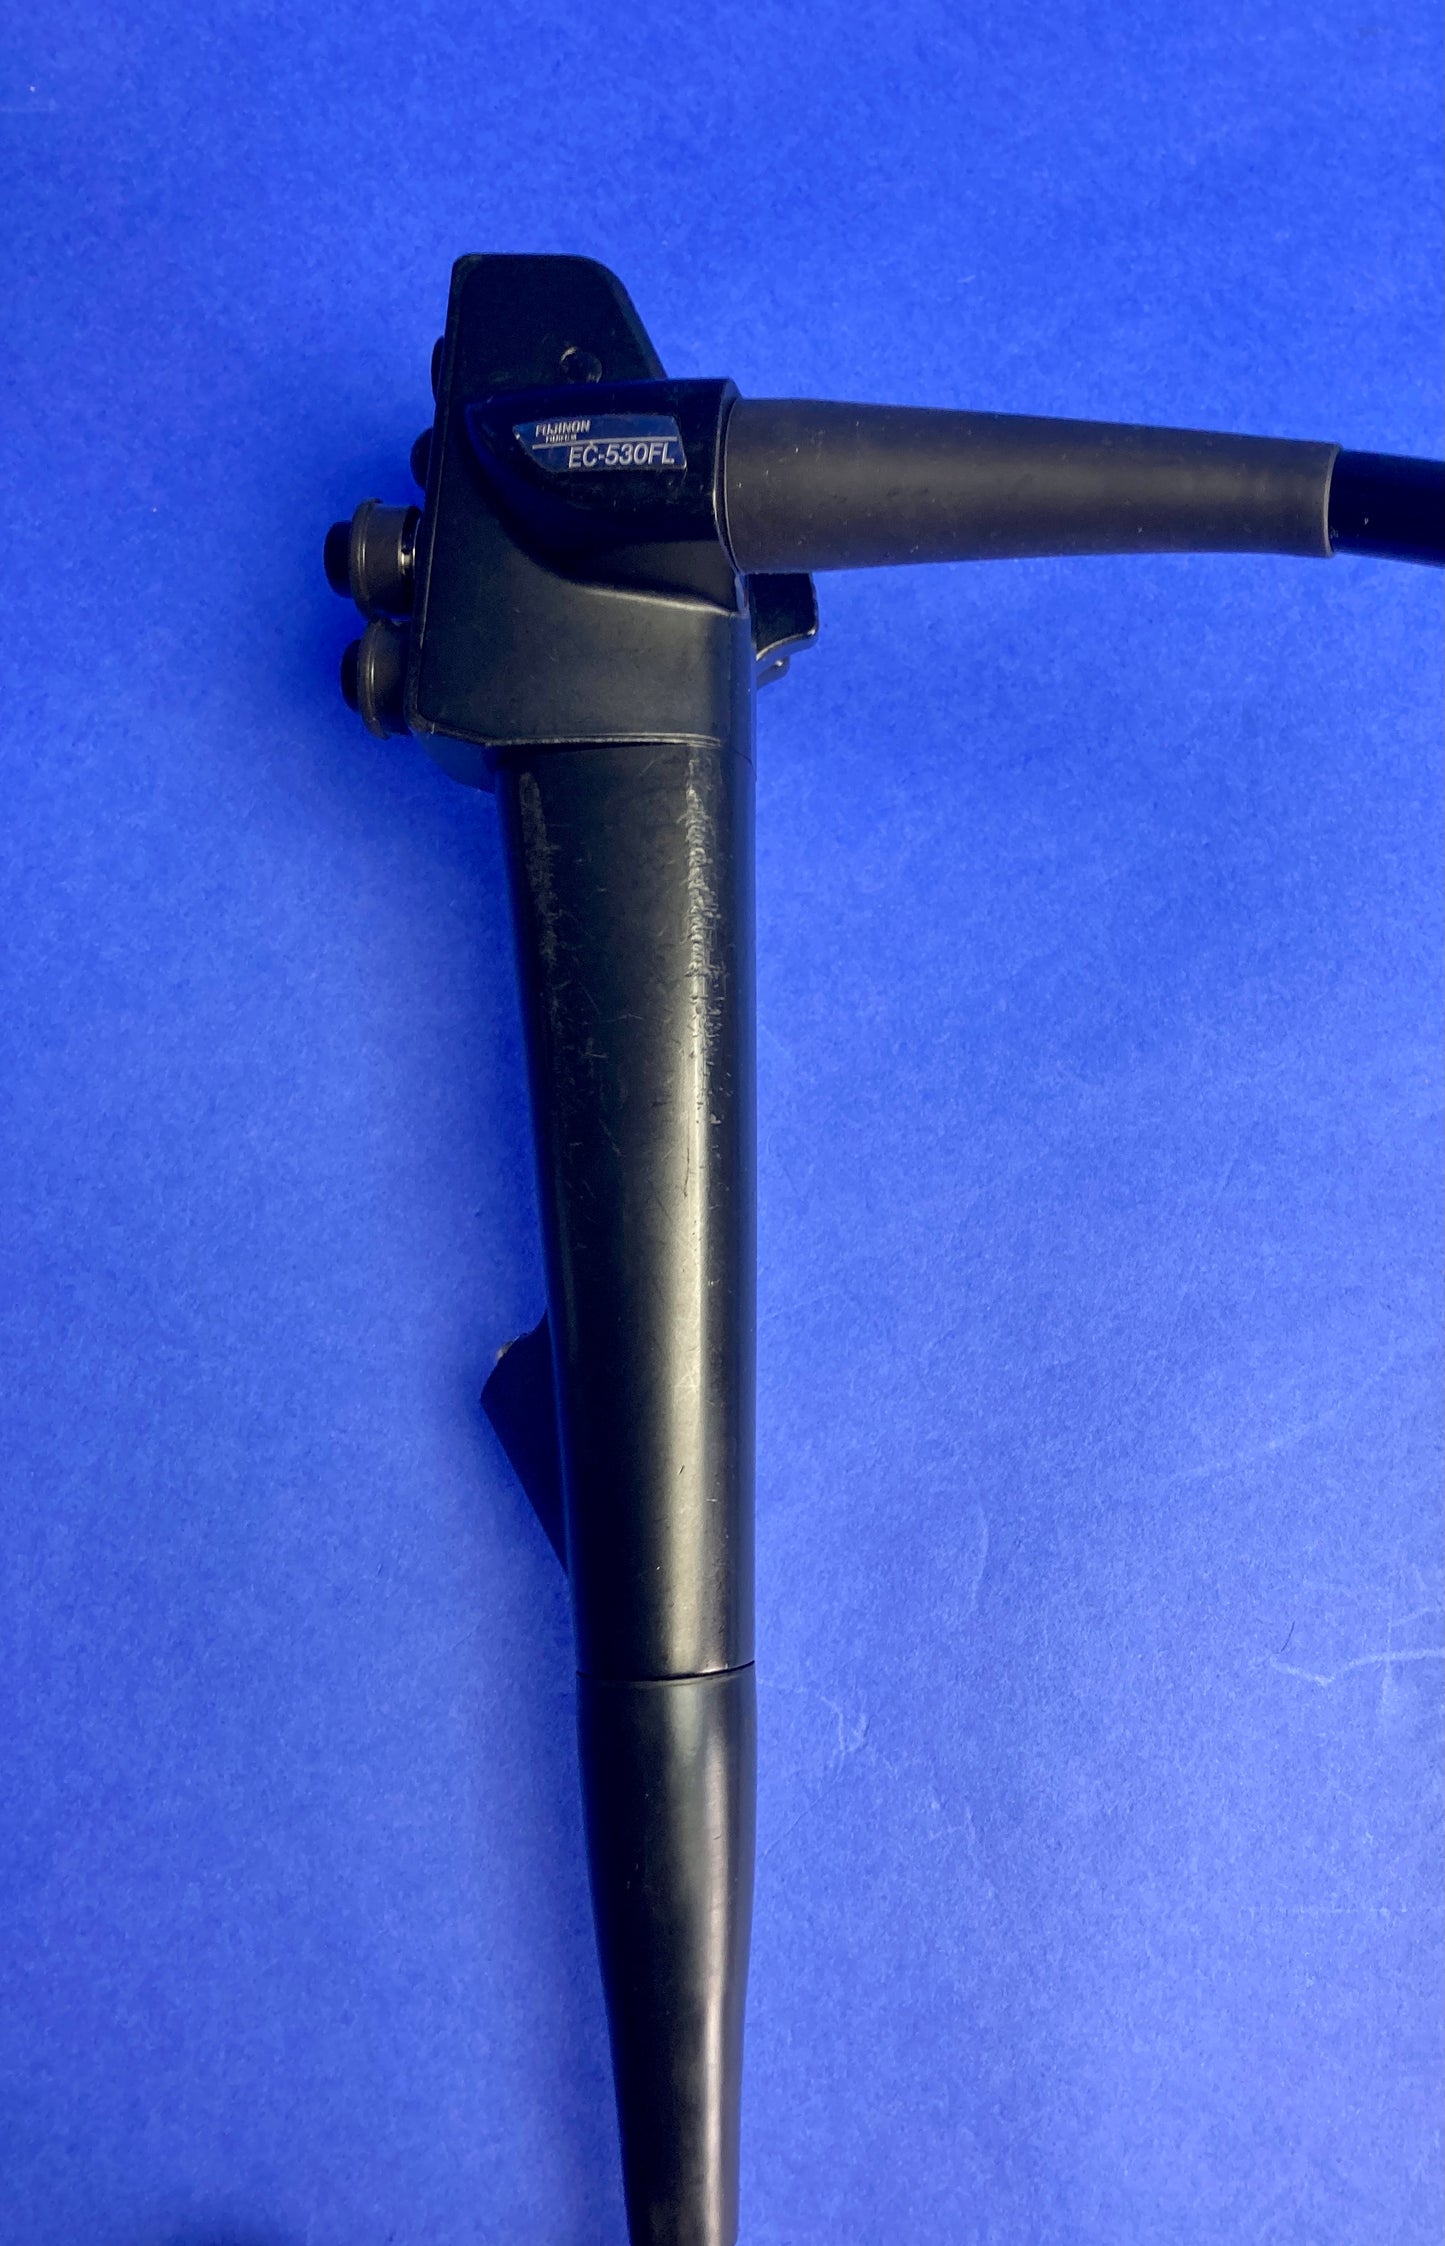 Endoscope with its brand and model number